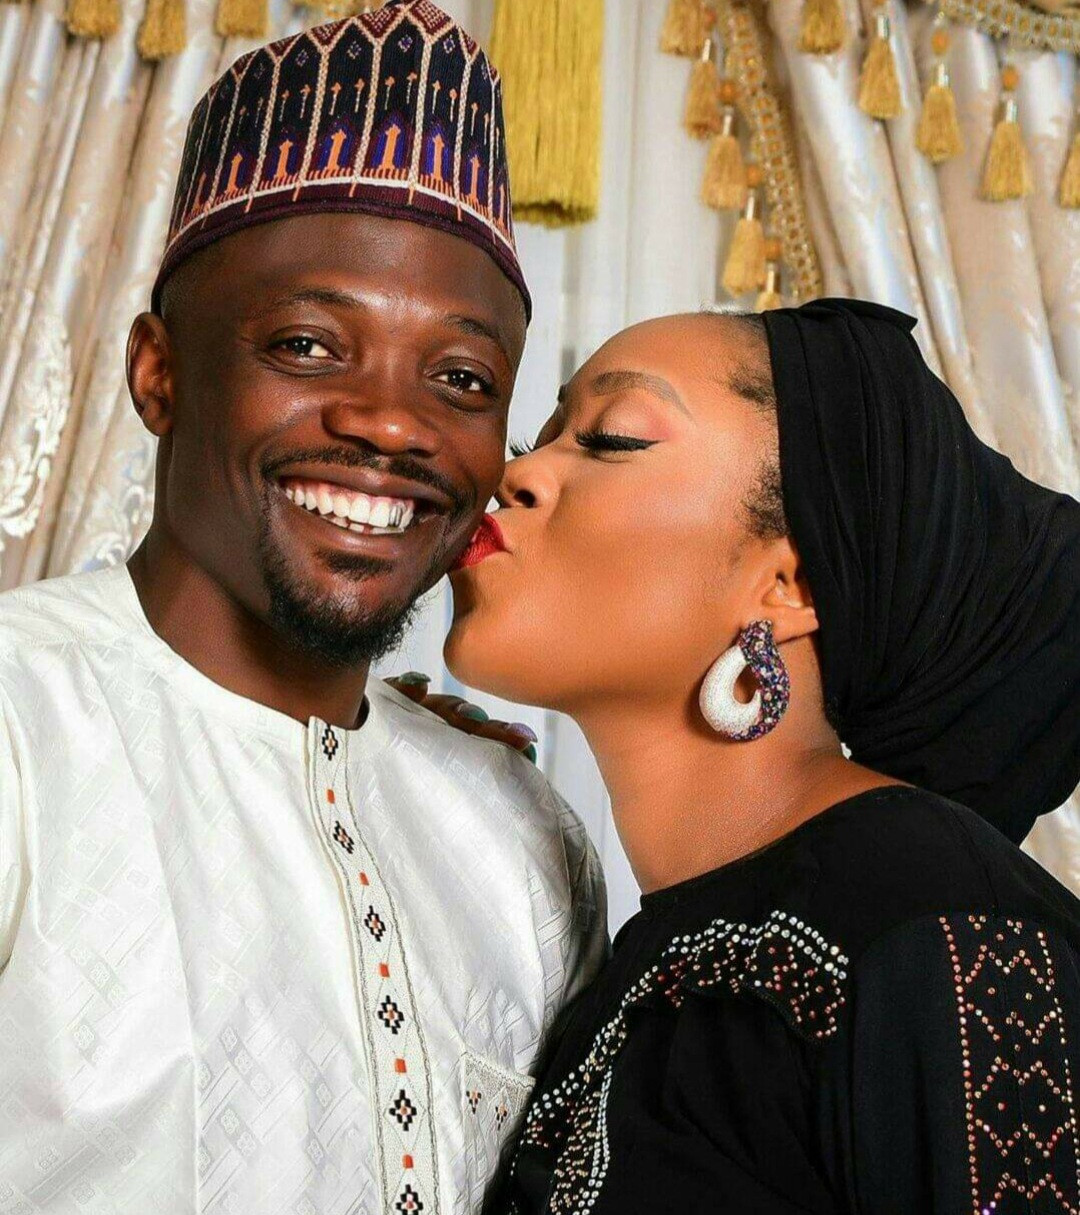 Ahmed Musa called out by Muslims for posting photo of his wife kissing him on the cheek